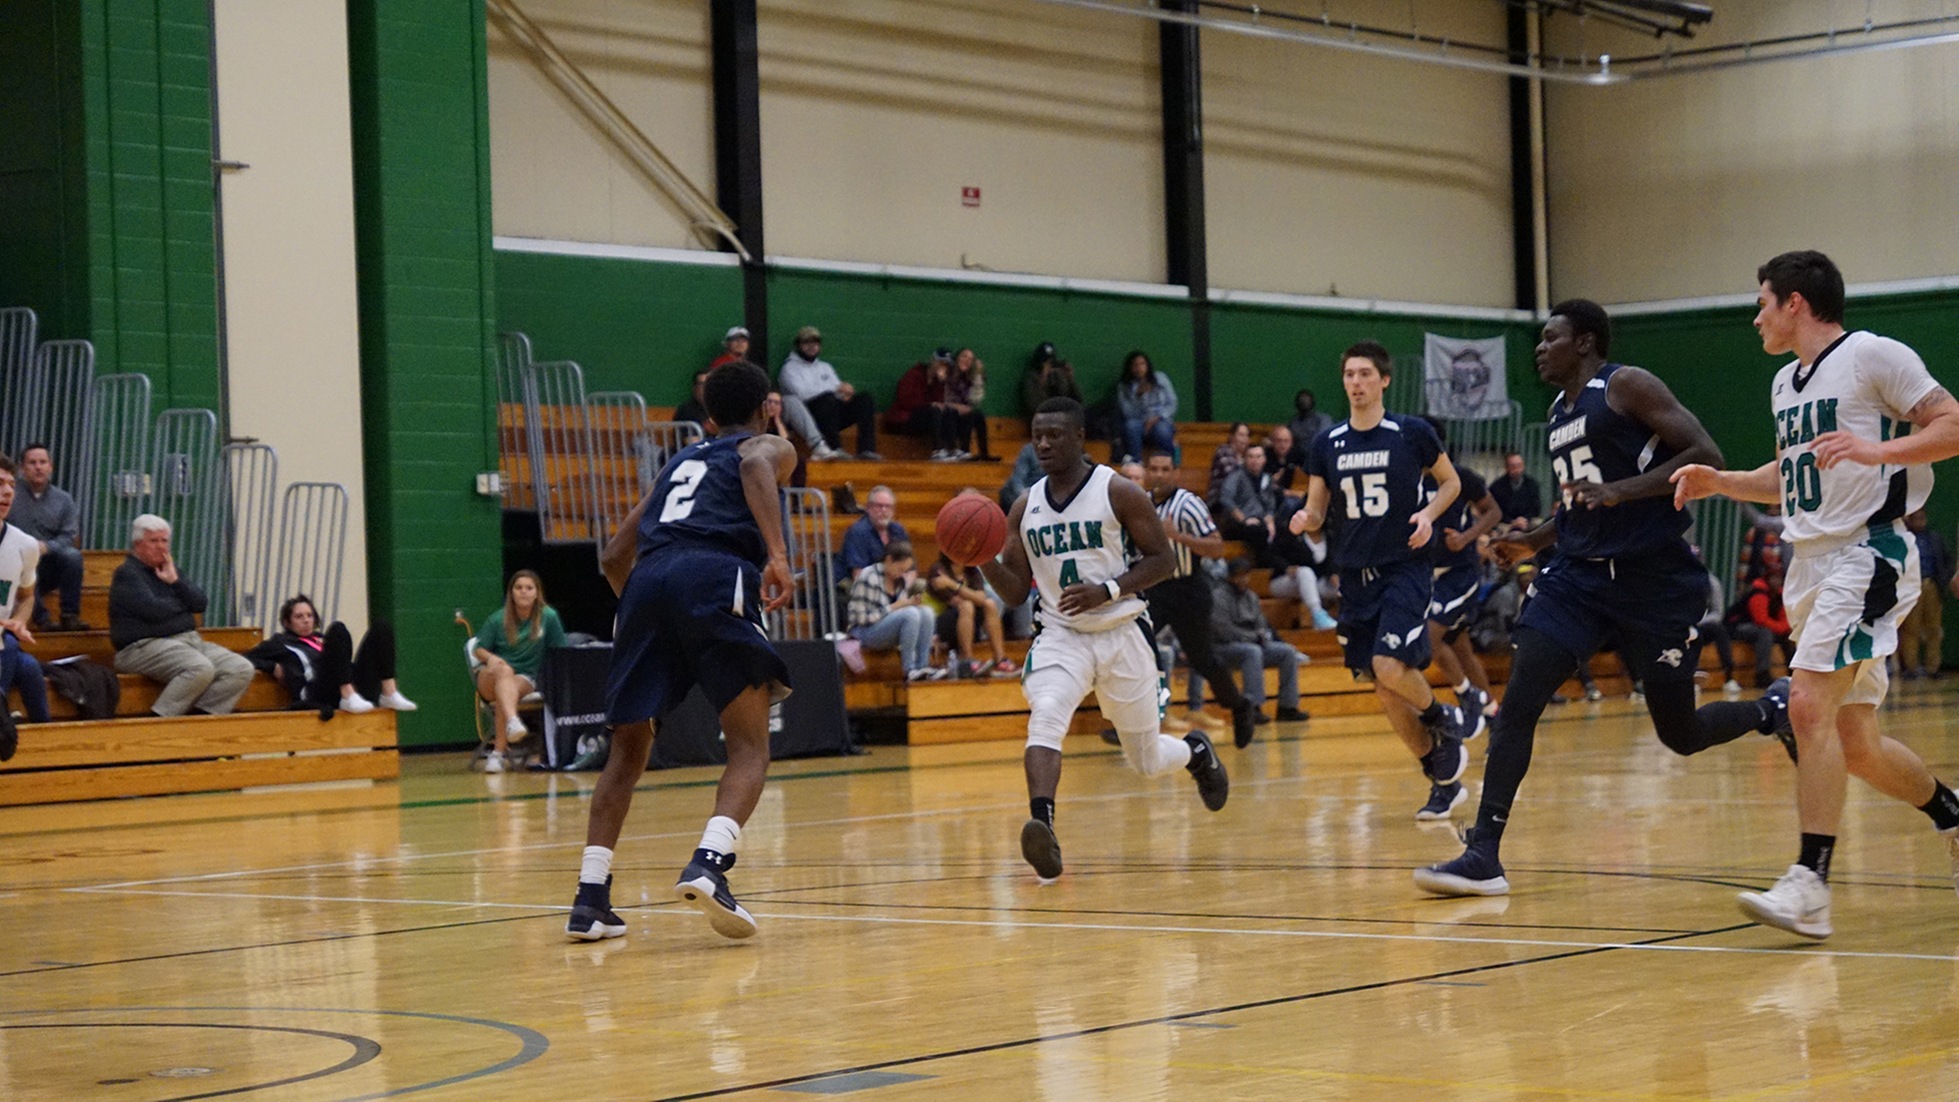 Vikings Men's Basketball Win Second Straight in 55-53 OT Victory at Camden